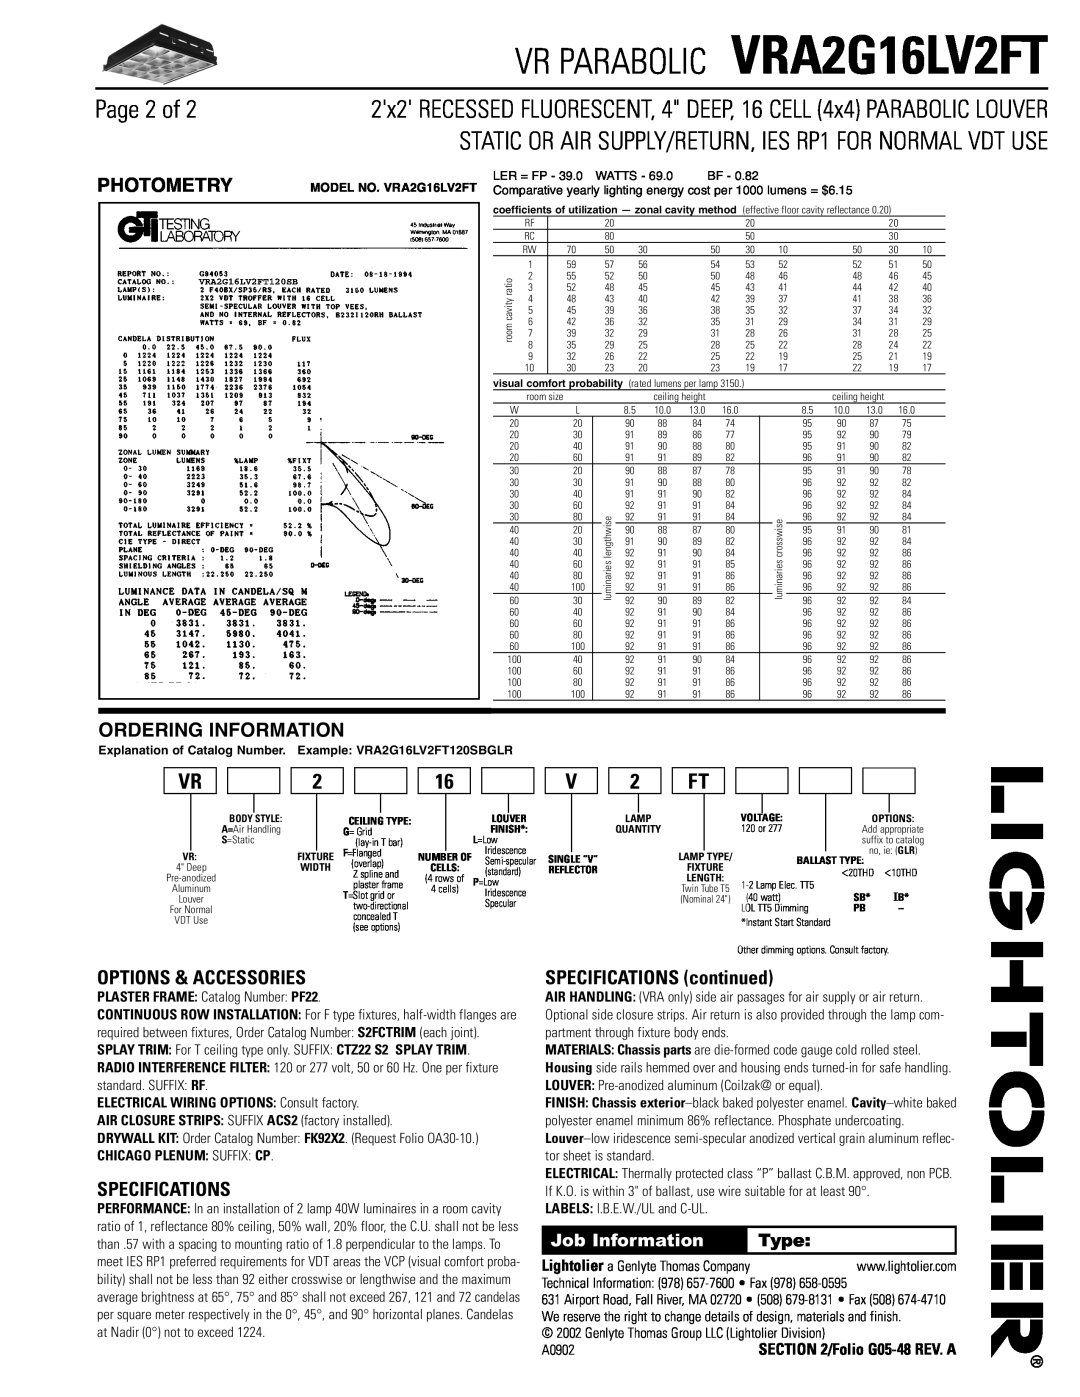 Lightolier VRA2G16LV2FT dimensions Page 2 of, Photometry, Ordering Information, Options & Accessories, Specifications, Type 